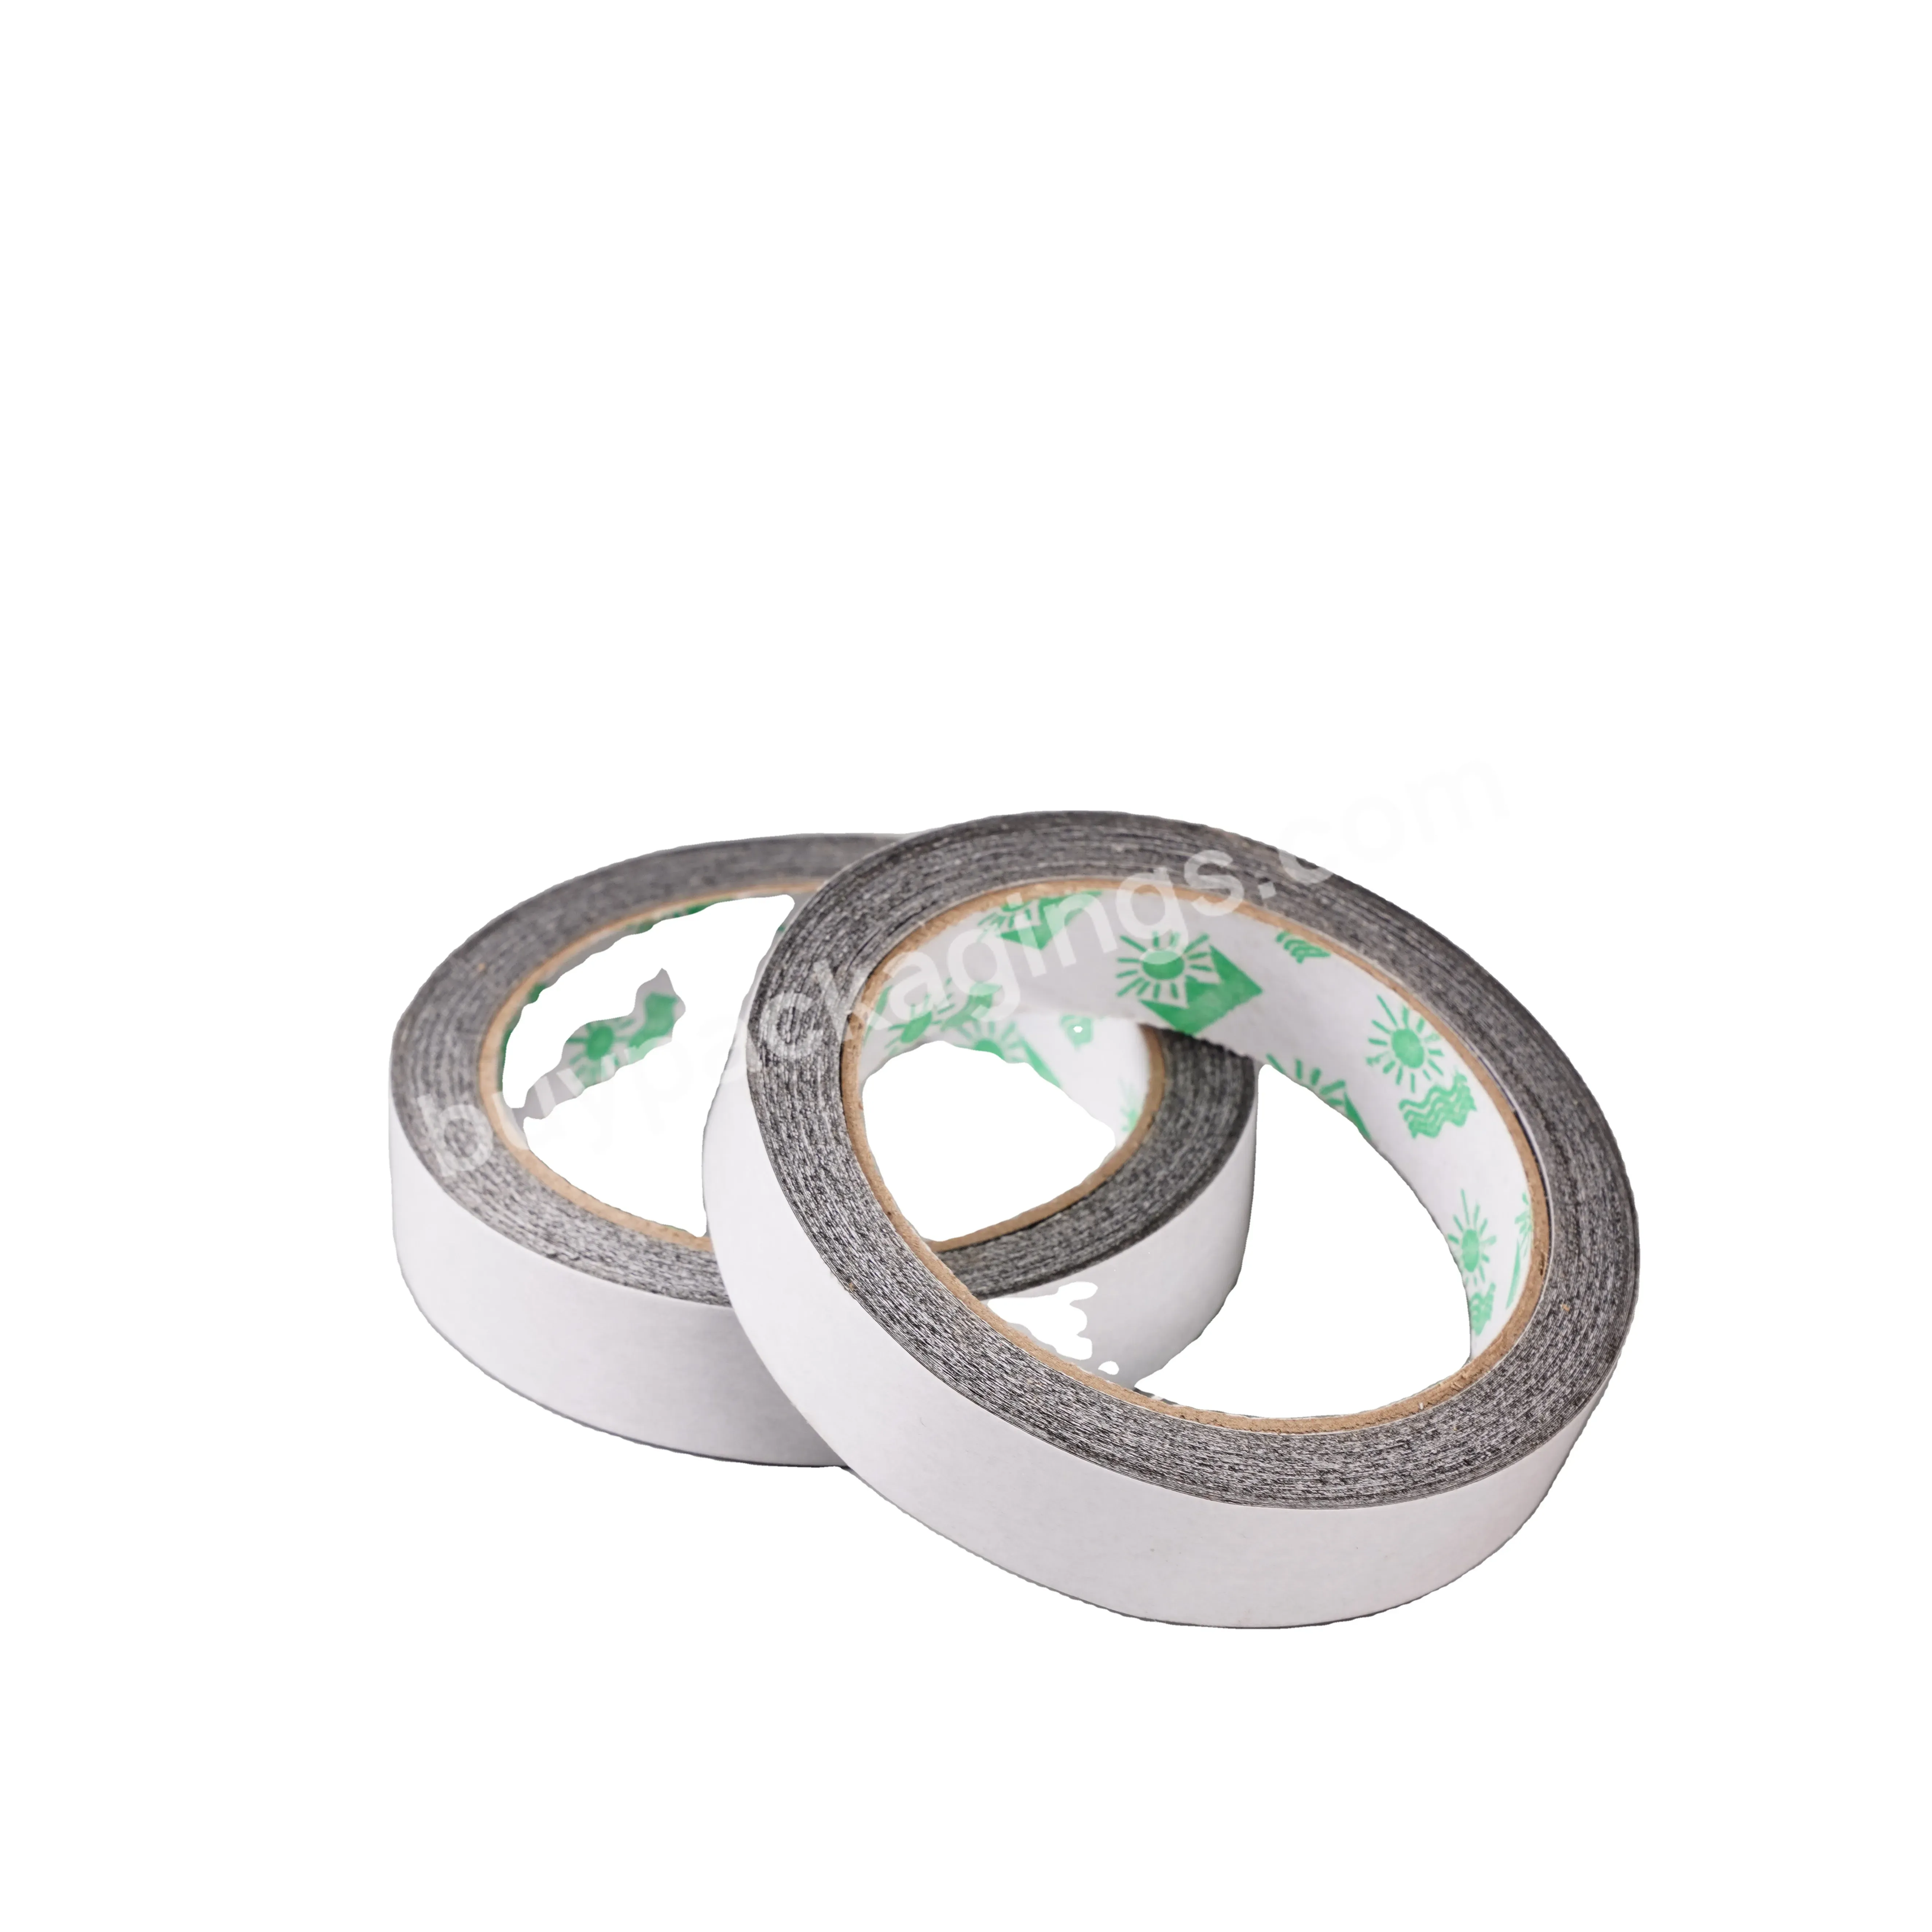 Factory Direct Selling Double-sided Transparent Tape Used For Fixing Articles